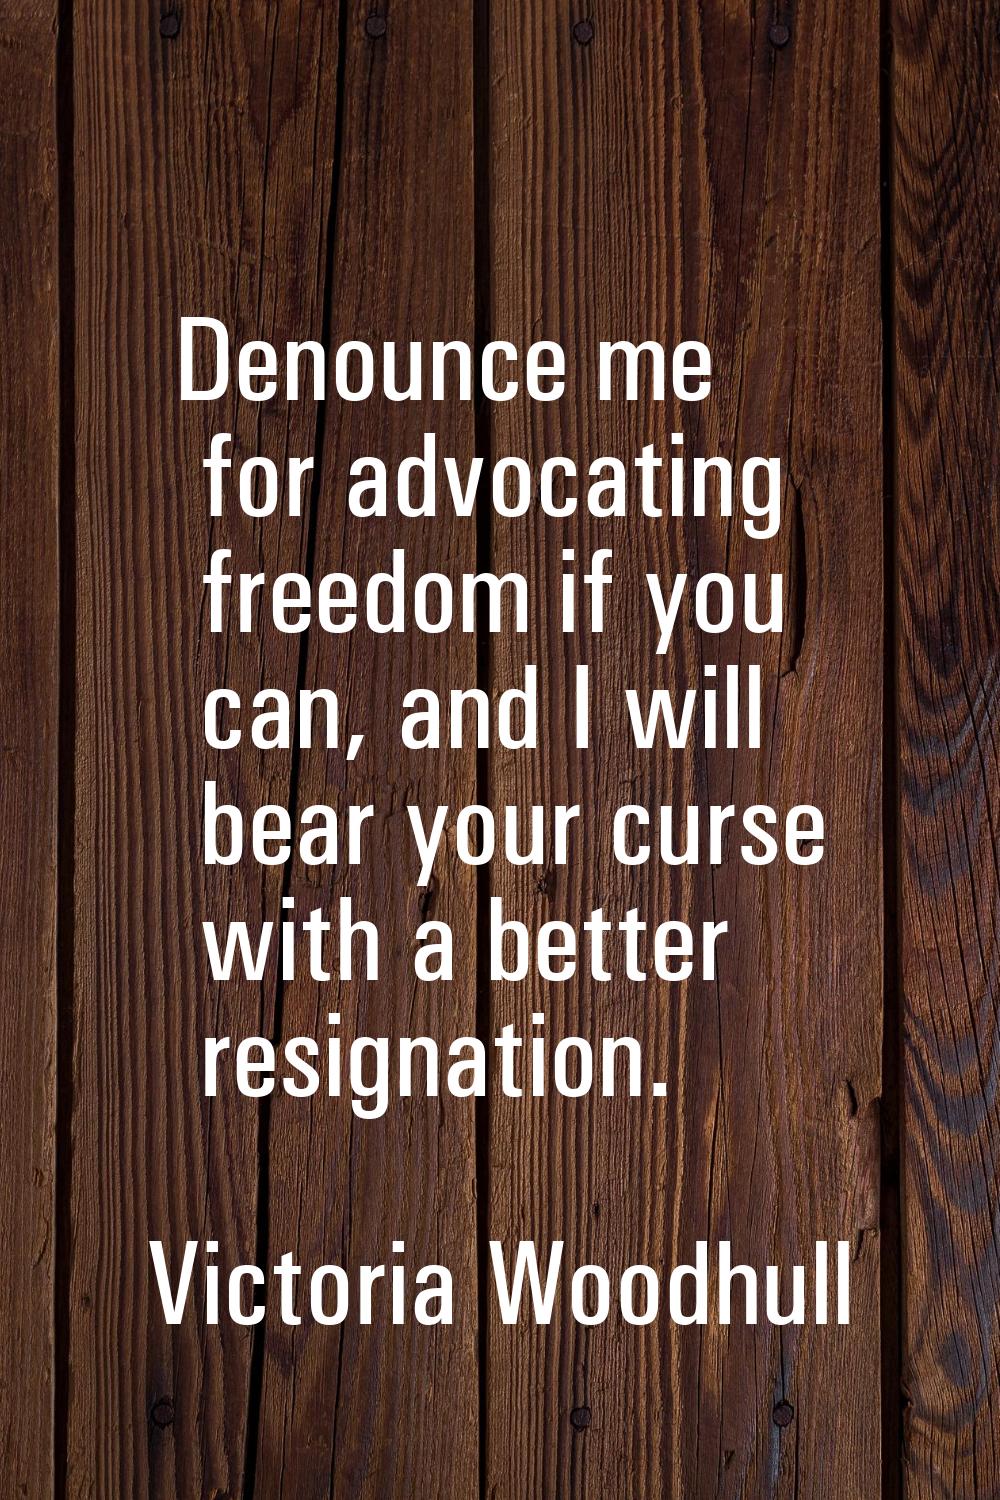 Denounce me for advocating freedom if you can, and I will bear your curse with a better resignation